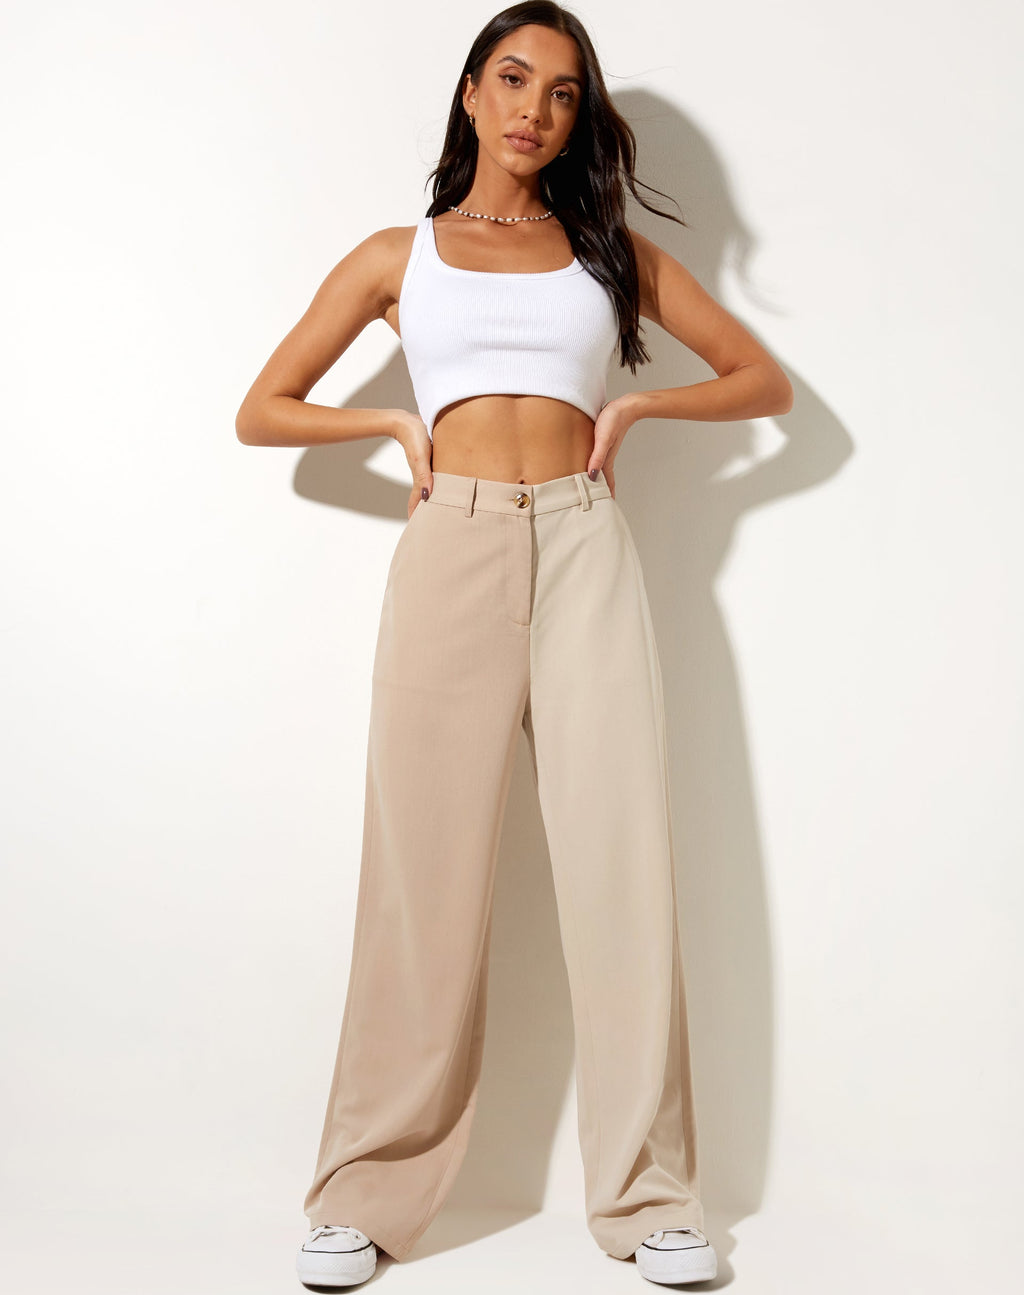 Abba Trouser in Contrast Tan and Beige